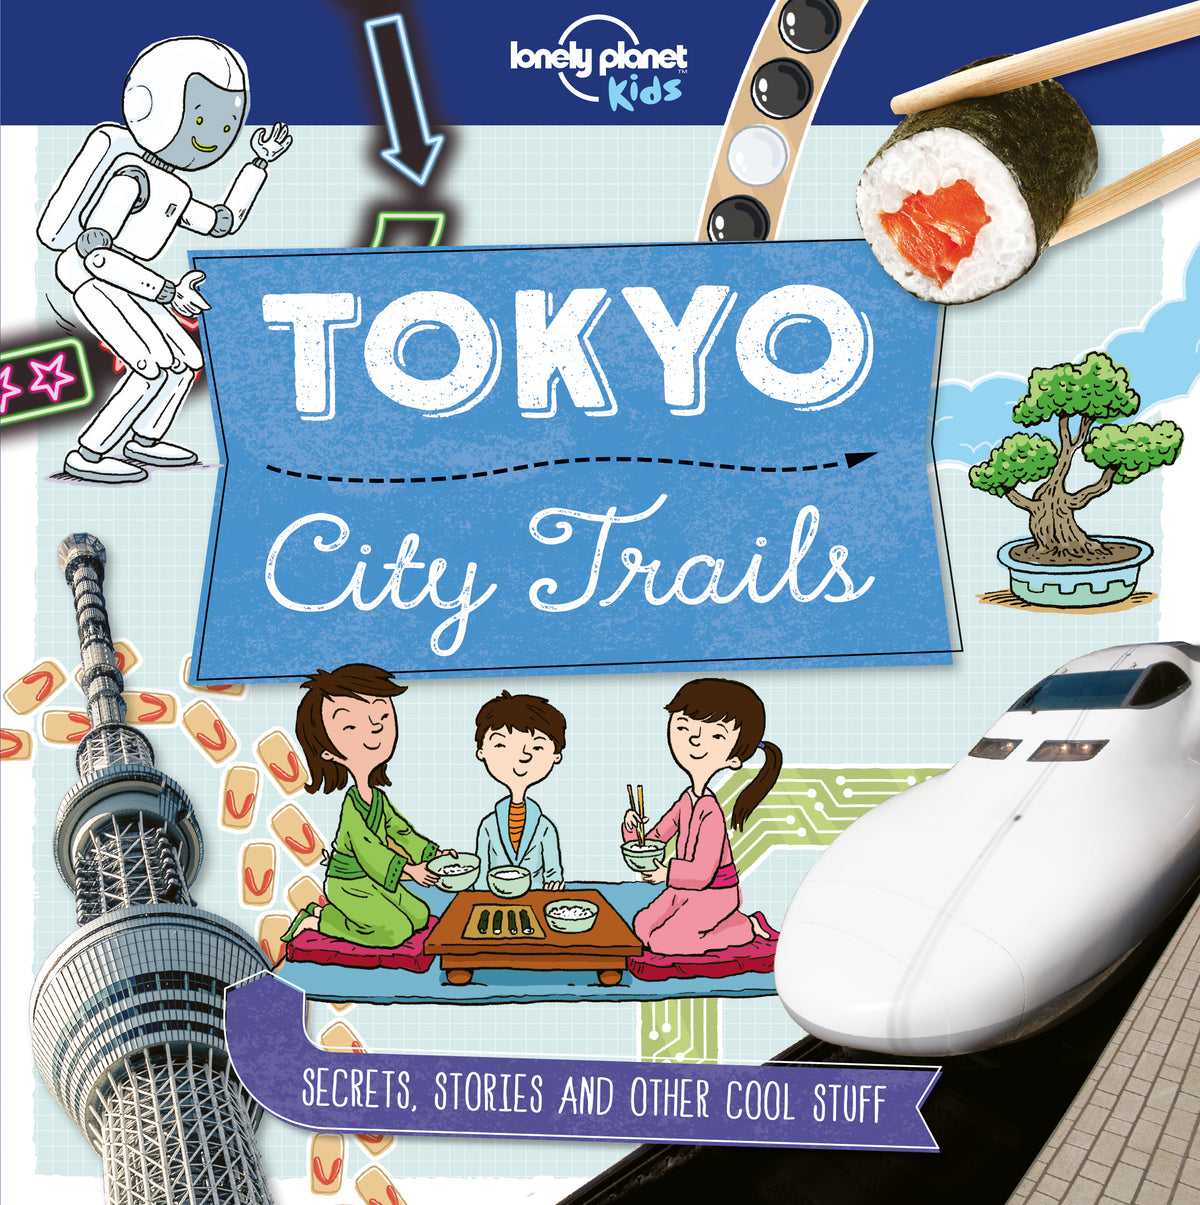 City Trails - Paris (Lonely Planet Kids) (English Edition) eBook : Kids, Lonely  Planet, Greathead, Helen: : Kindle Store